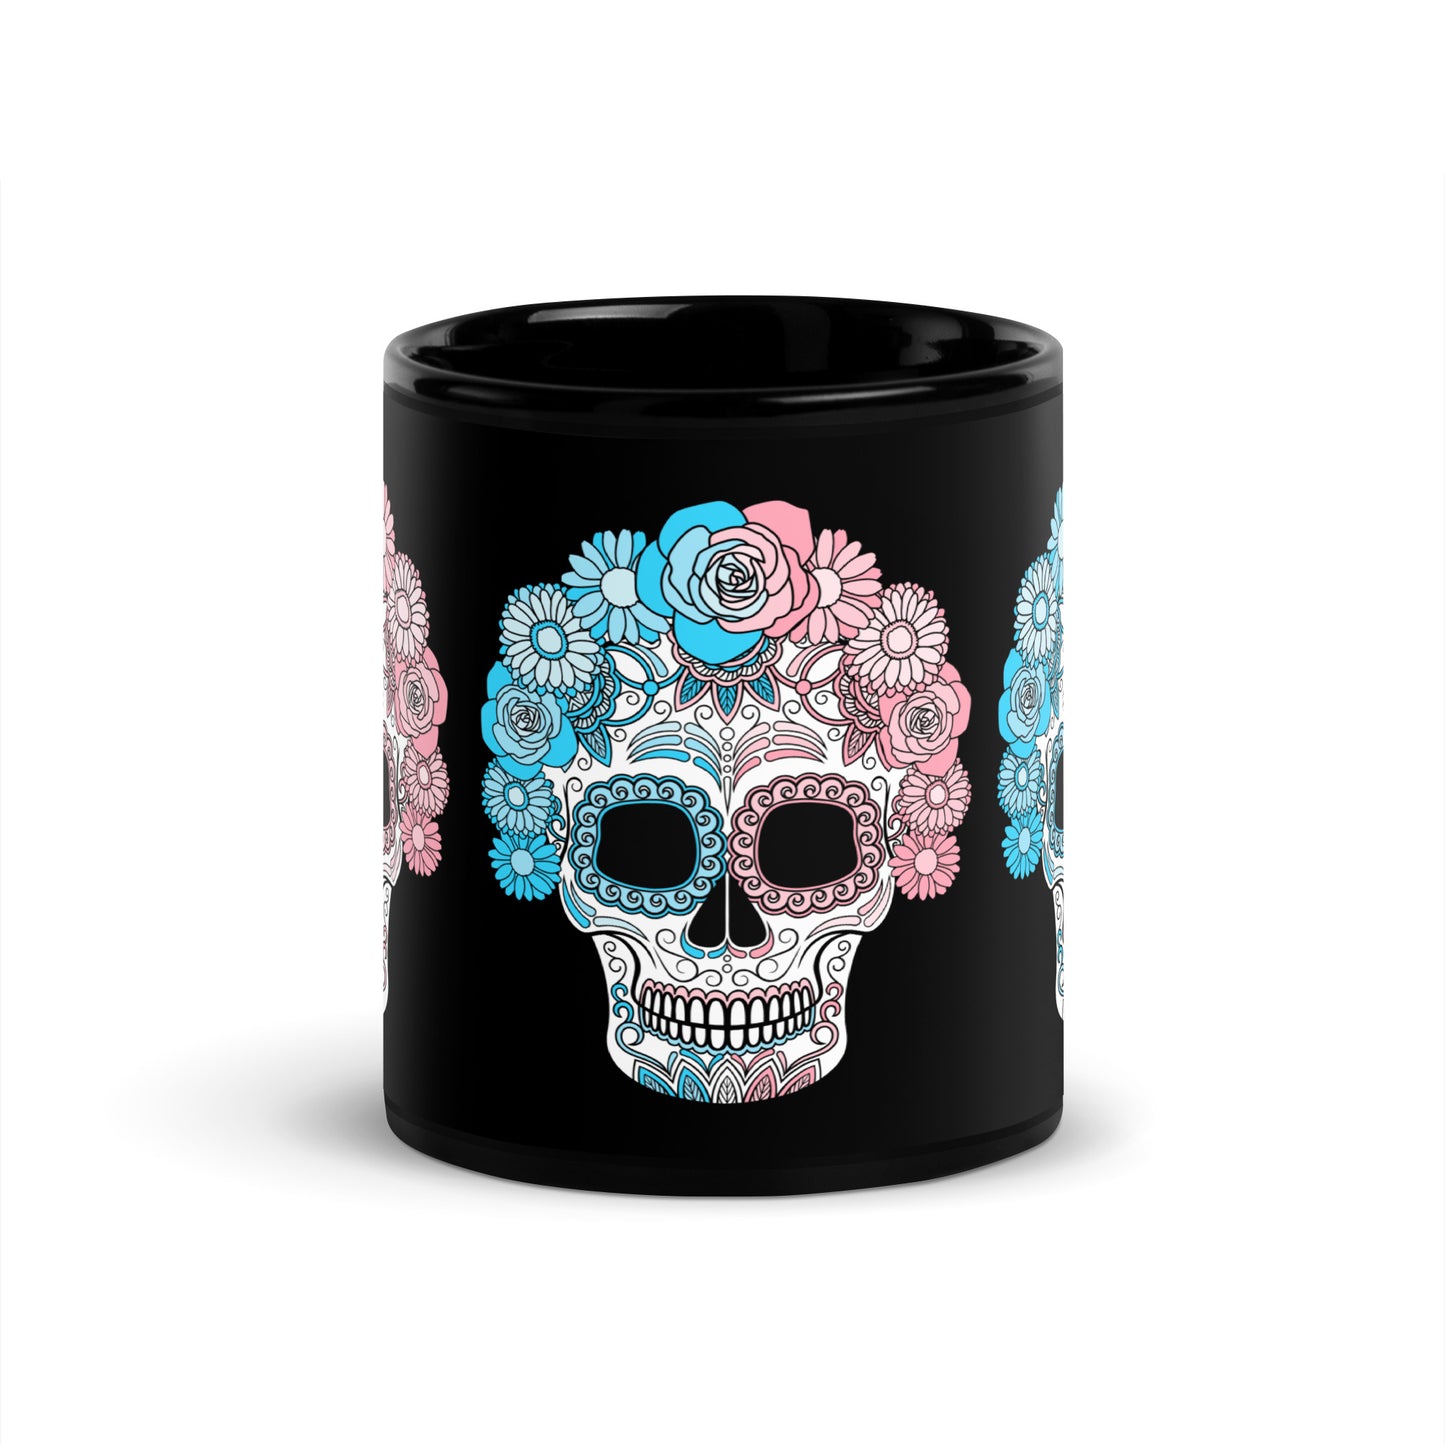 Trans Day of the Dead Mask Mug